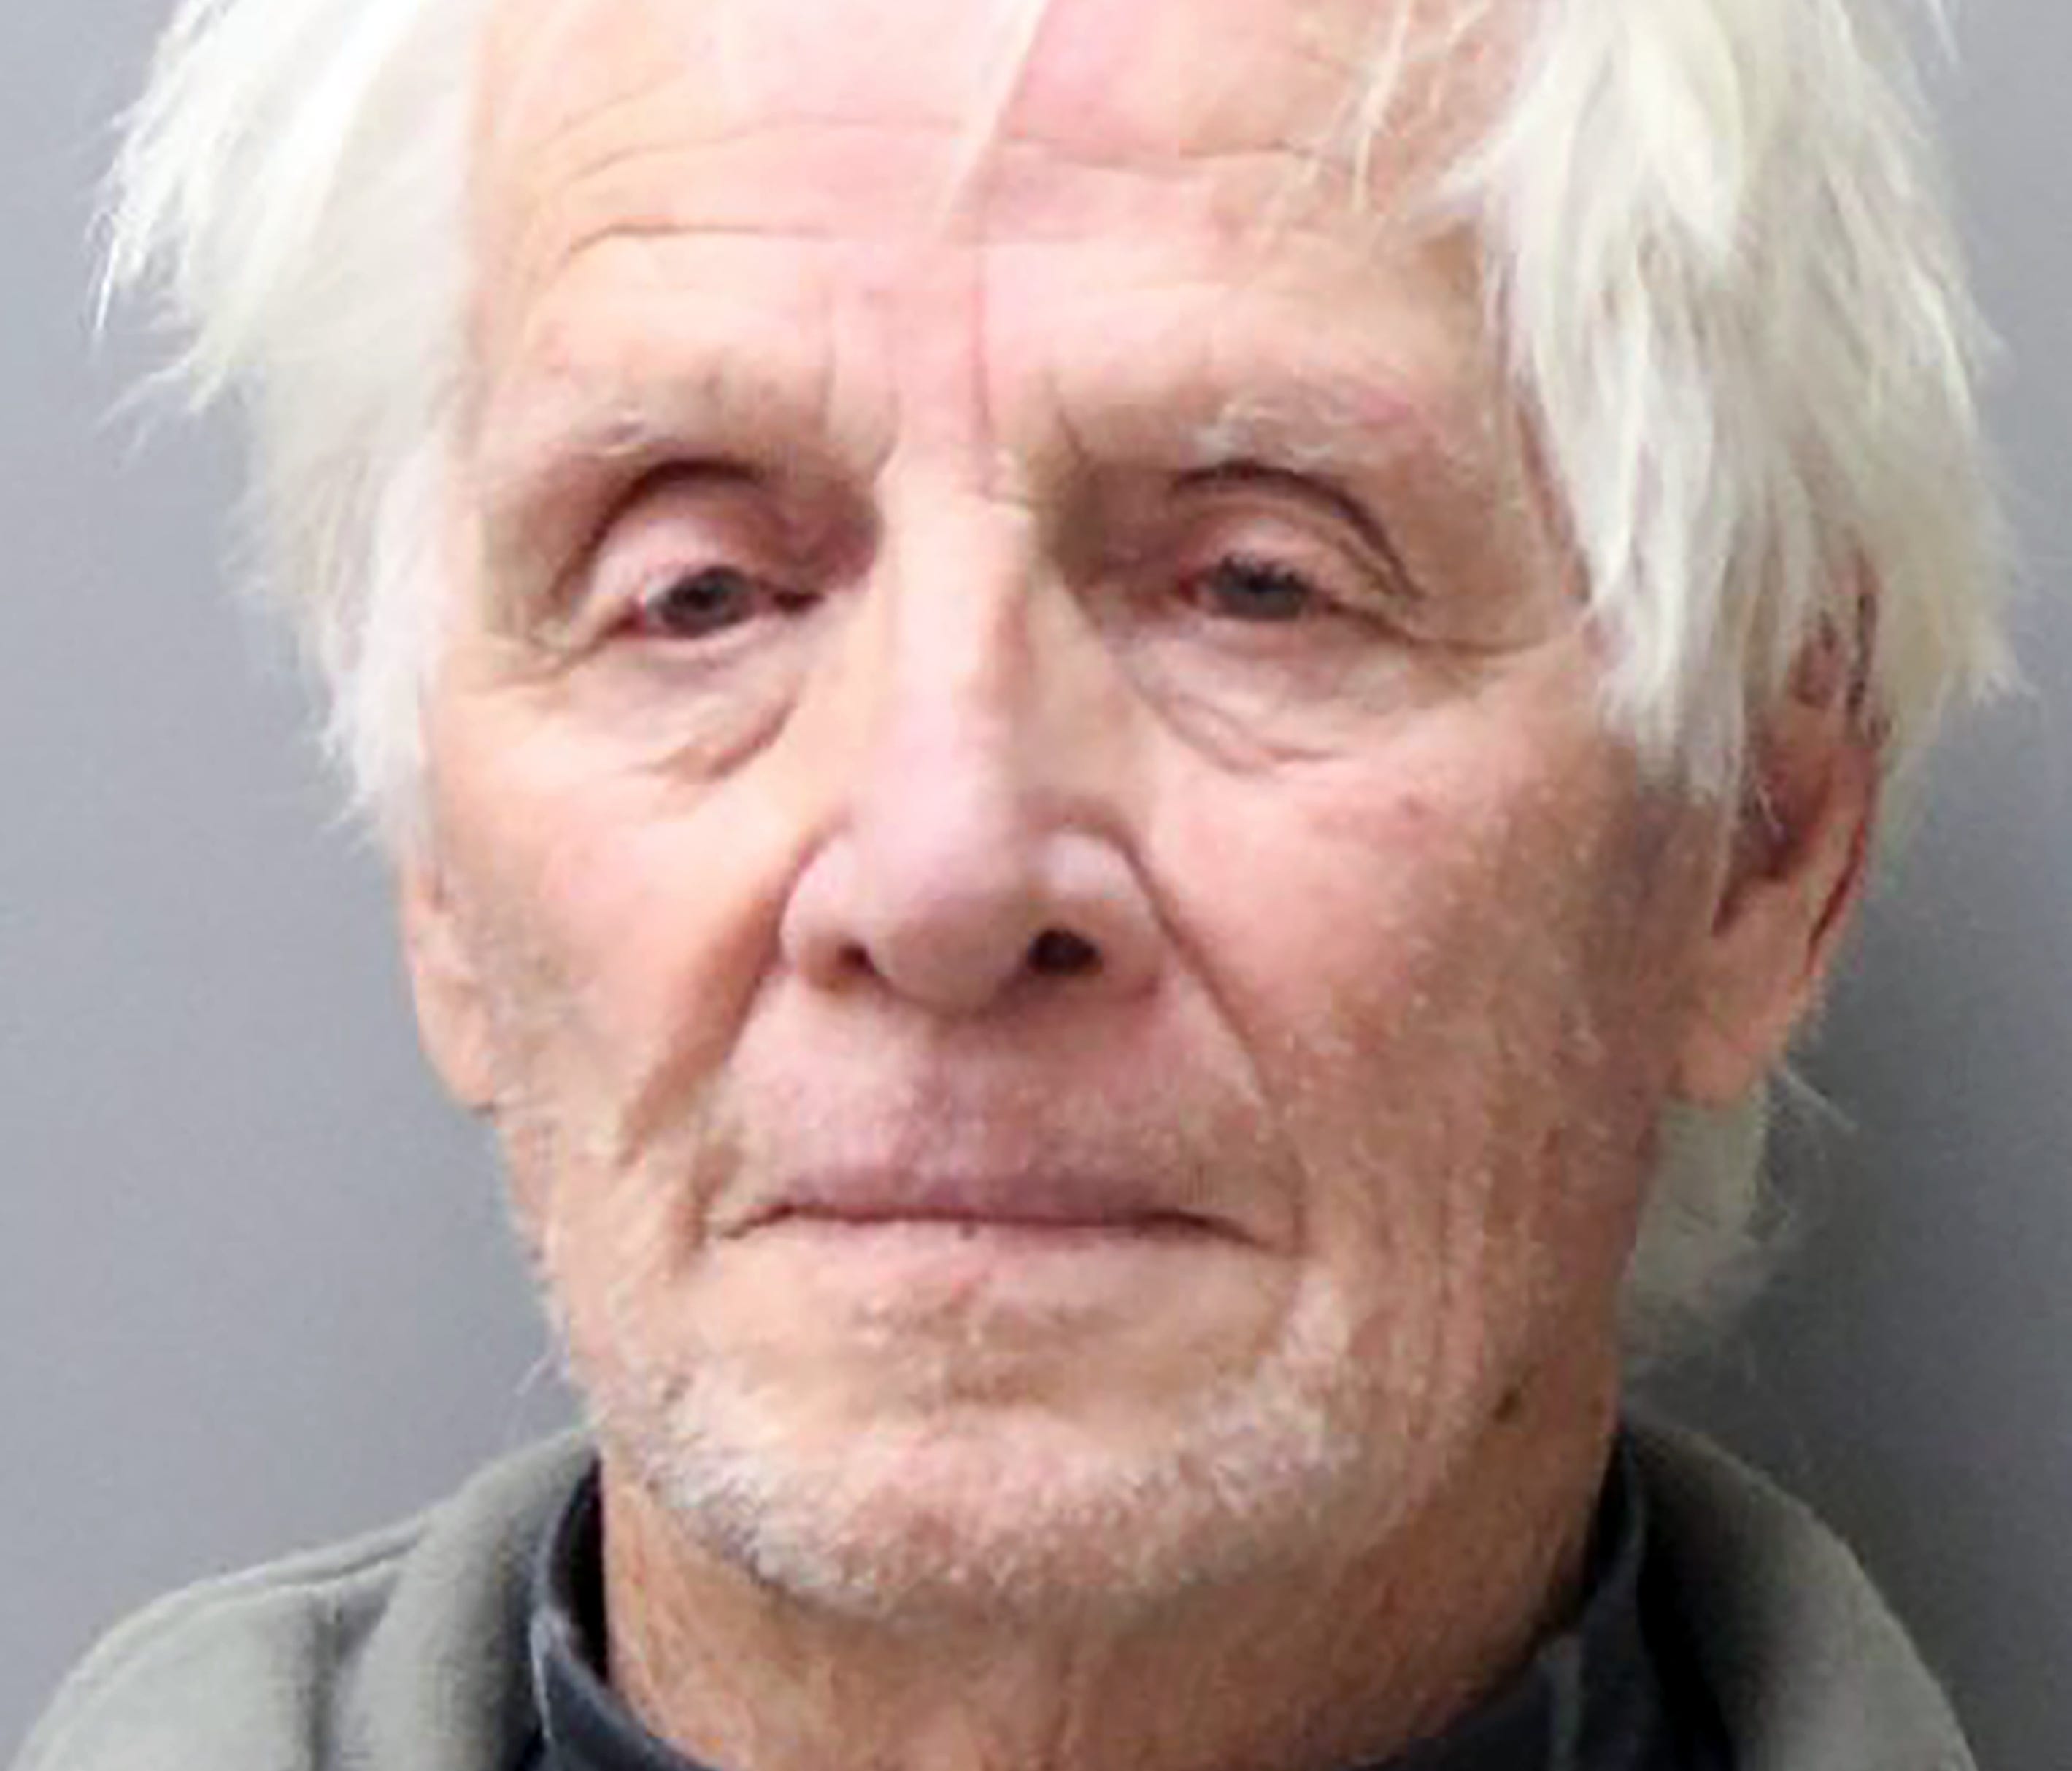 Patrick Jiron, 83, and his wife Barbara Jiron, 80, of Clearlake Oaks, Calif., told sheriff's deputies in Nebraska they had planned to give out the $300,000 of marijuana they had to friends and family.